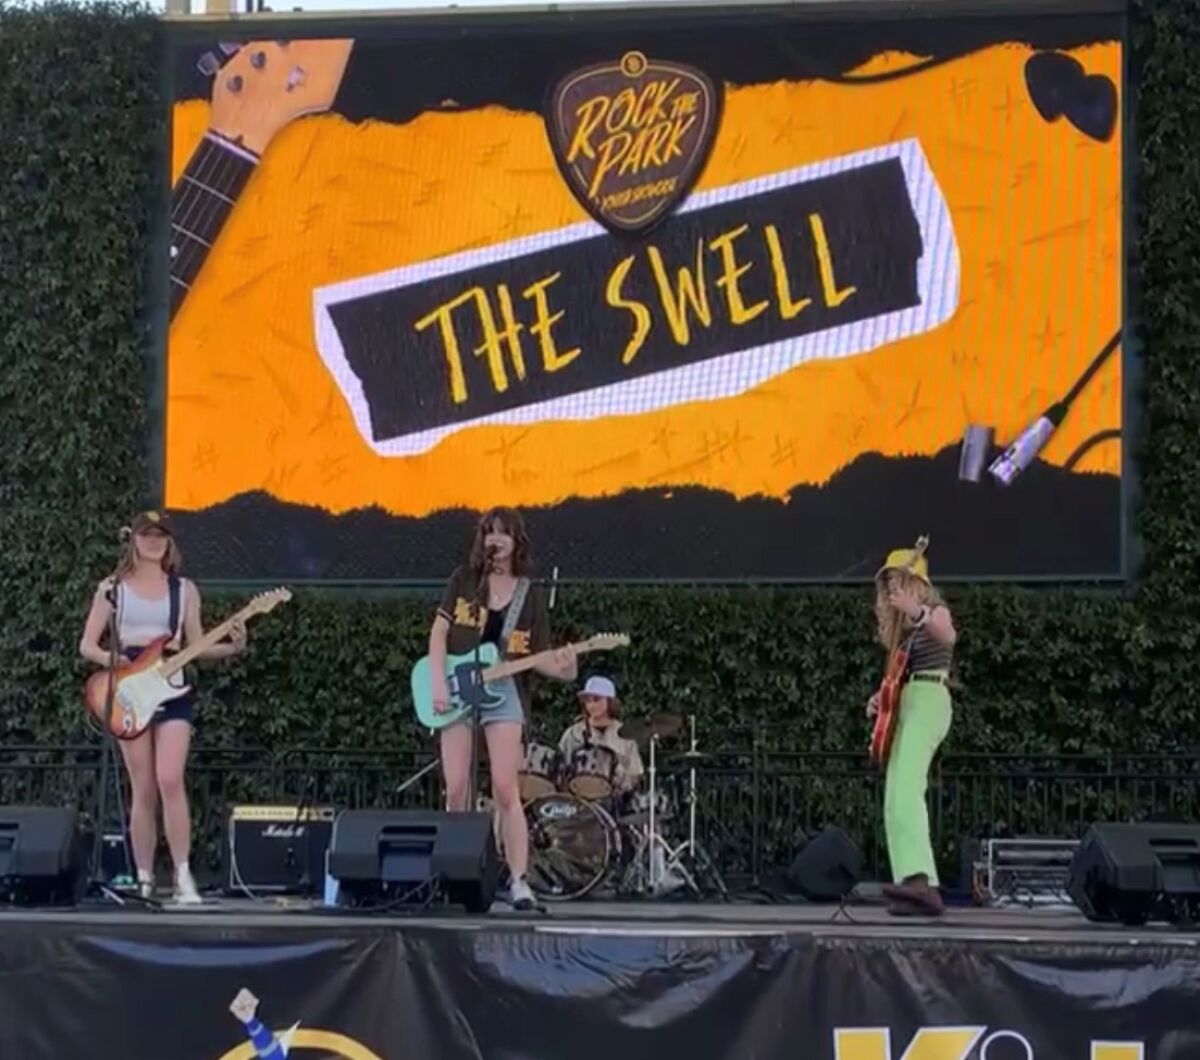 The Swell band performing at Petco Park.